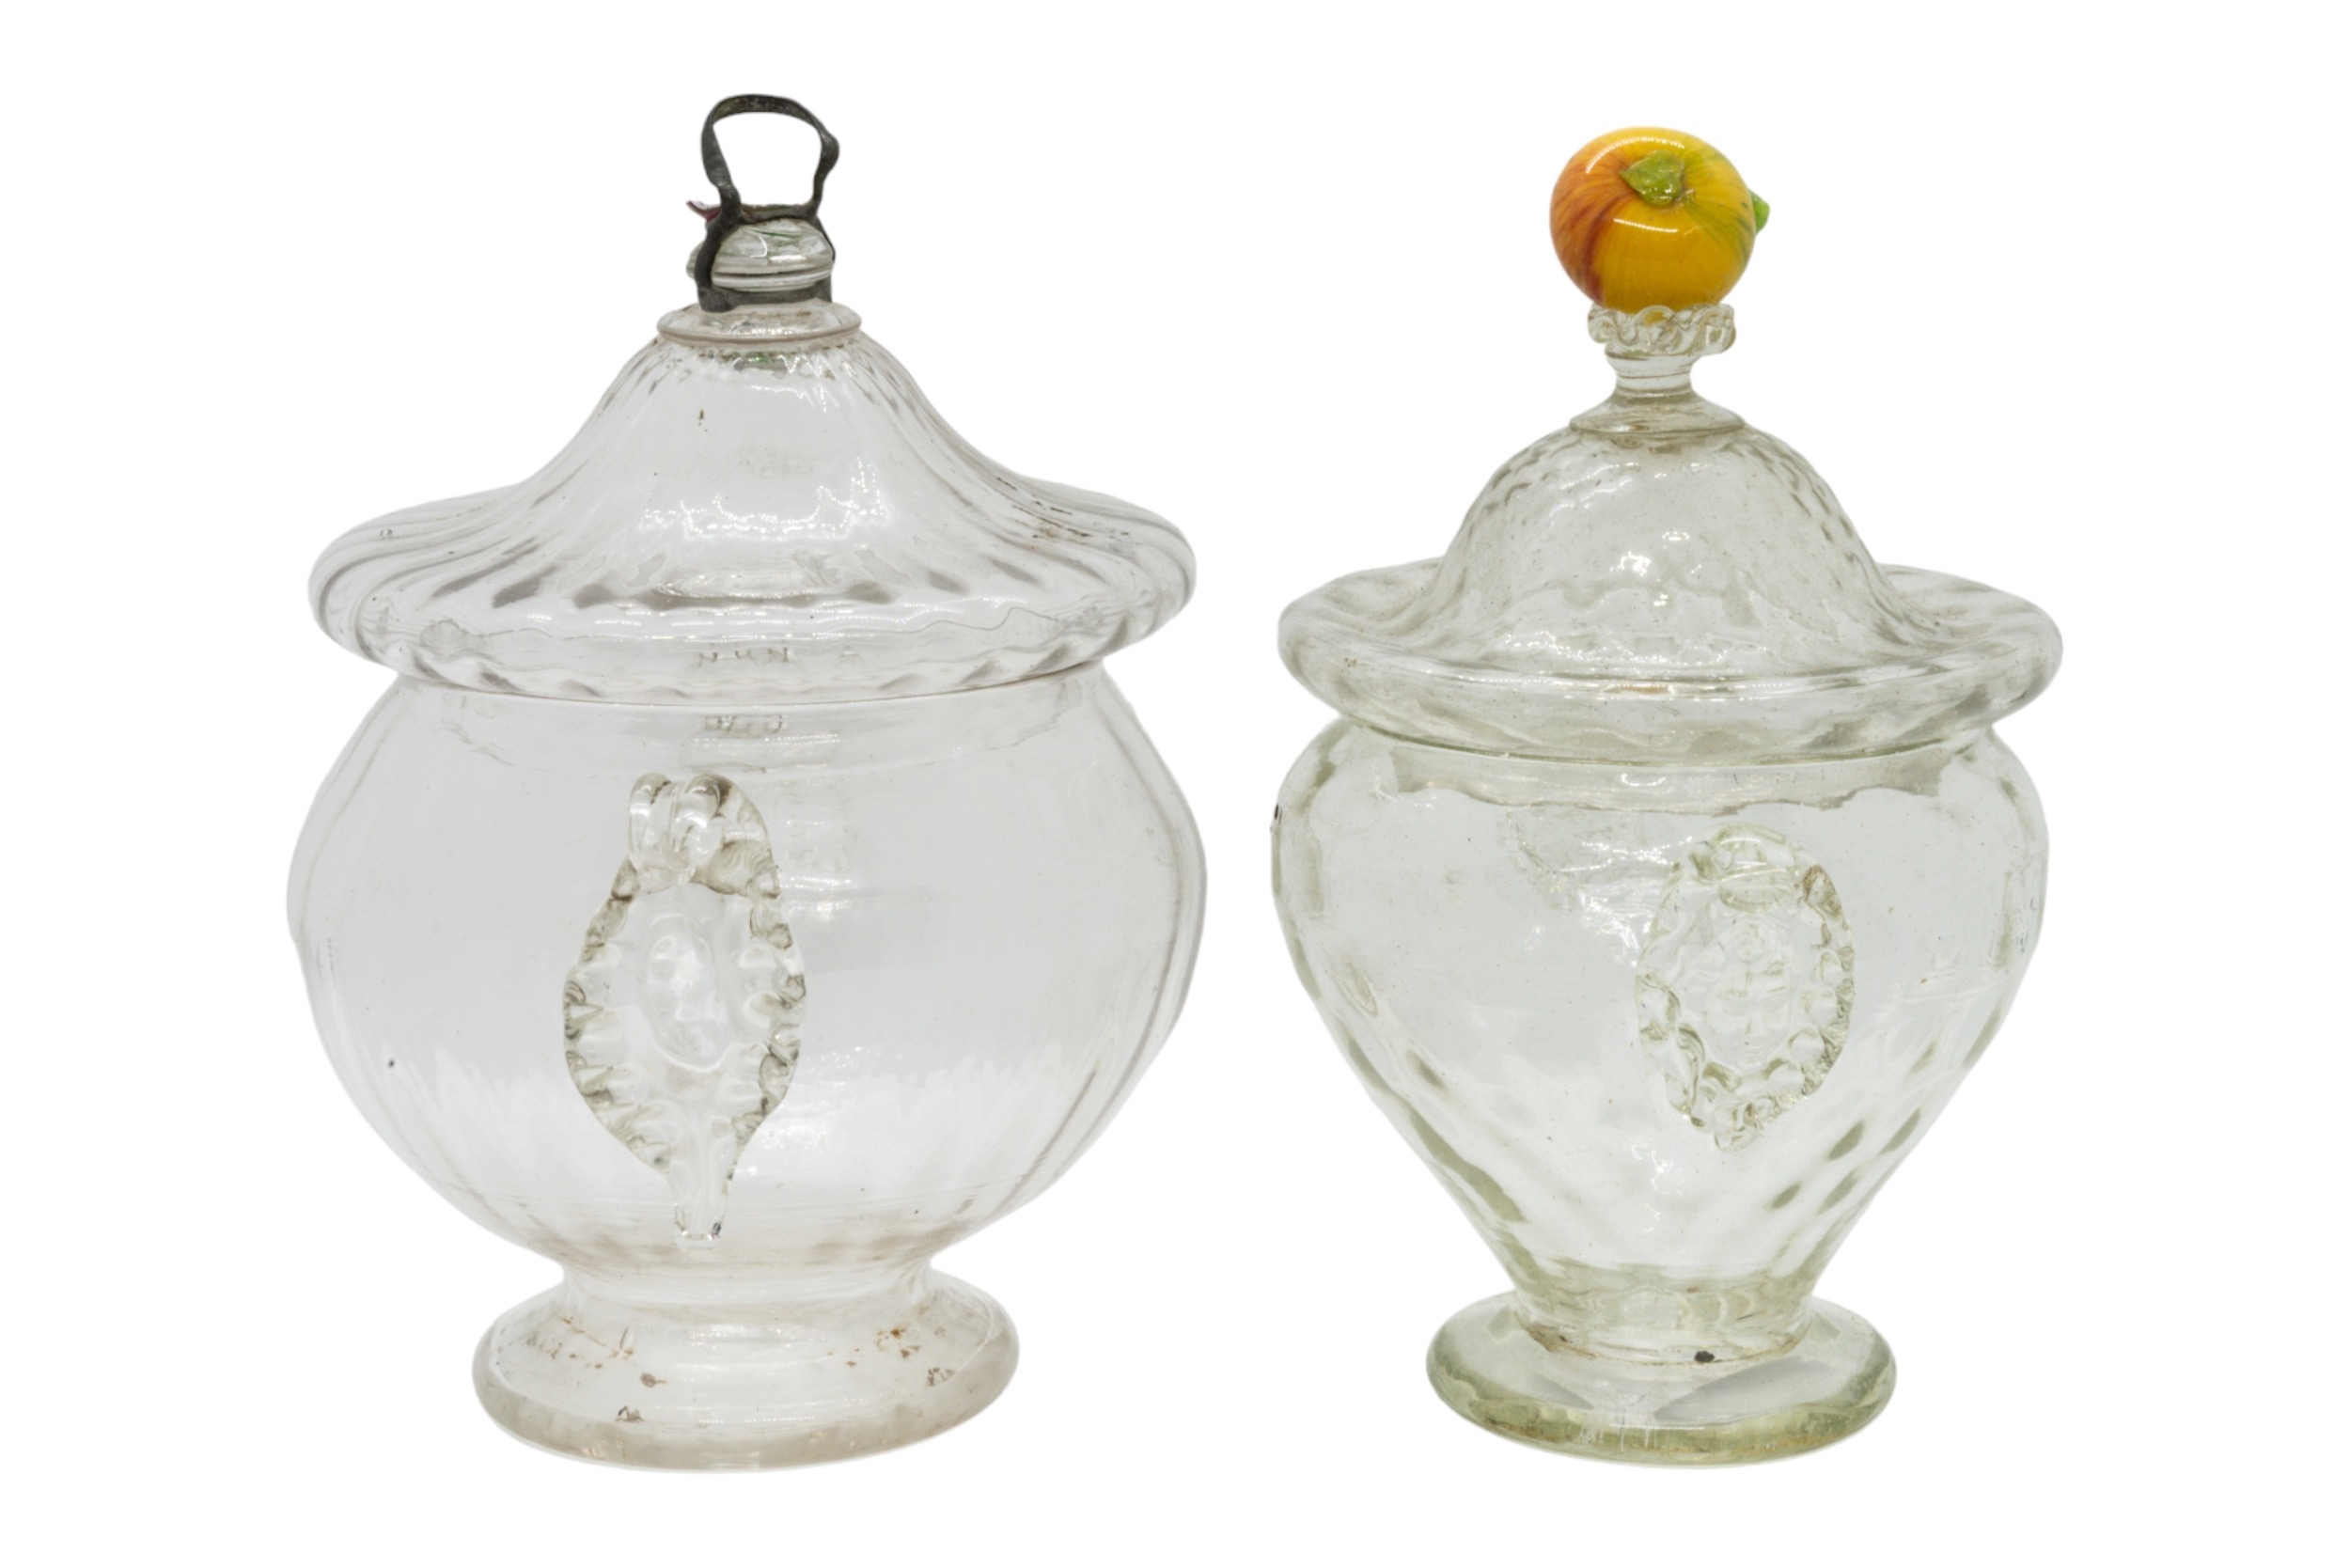 TWO VENETIAN GLASS JARS 18th/19th century, one with fruit finial, the other final broken off, - Image 2 of 2